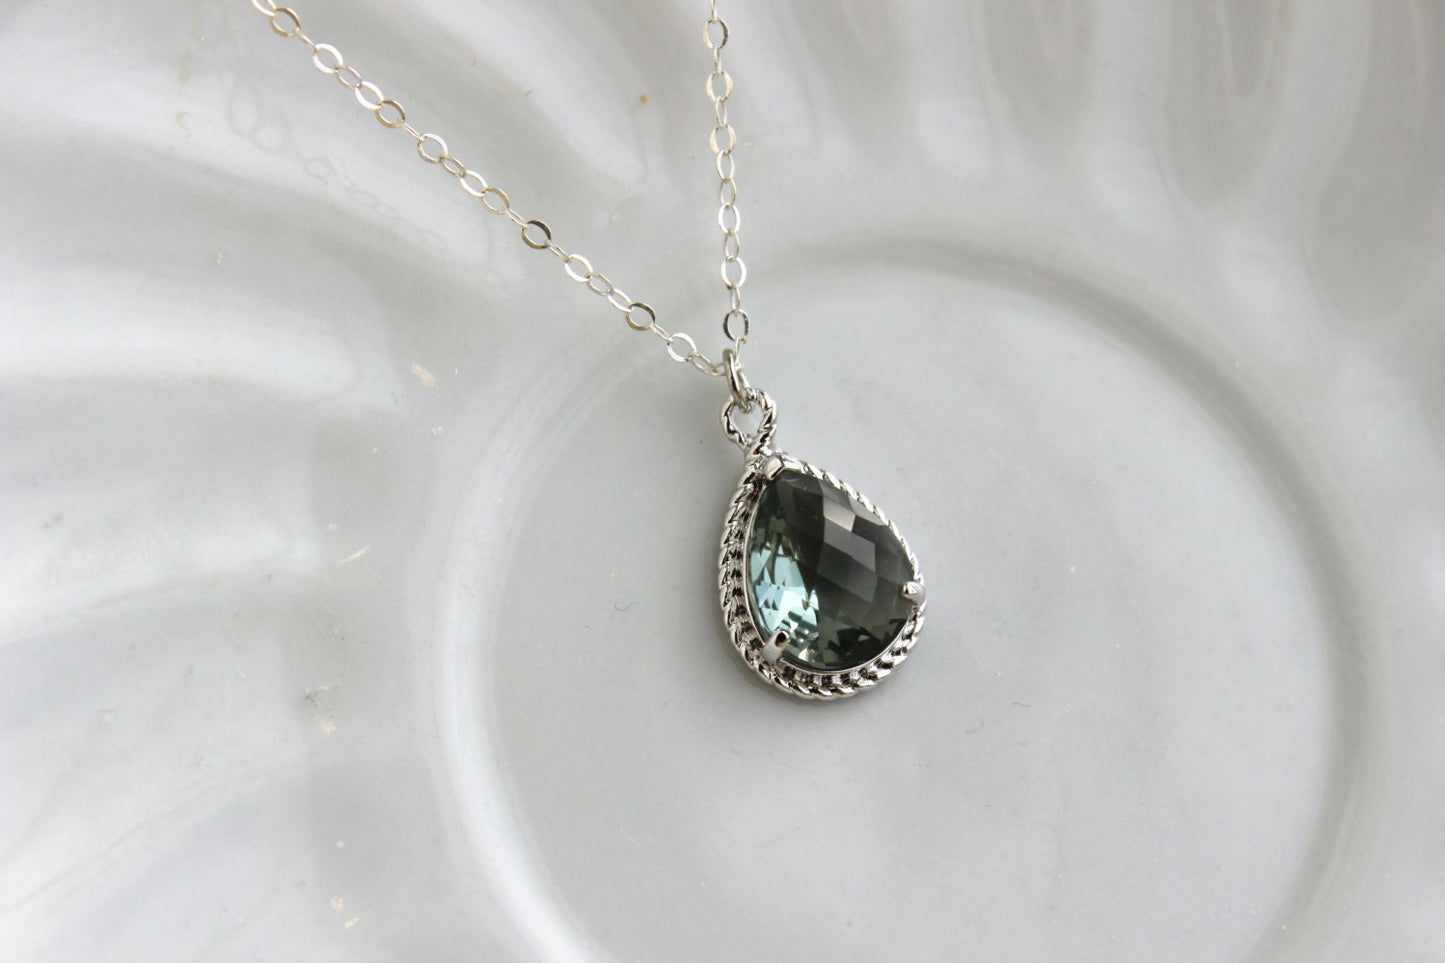 Charcoal Gray Necklace Silver Teardrop Grey Jewelry Sterling Silver Chain - Bridesmaid Jewelry - Wedding Jewelry - Charcoal Necklace Gray